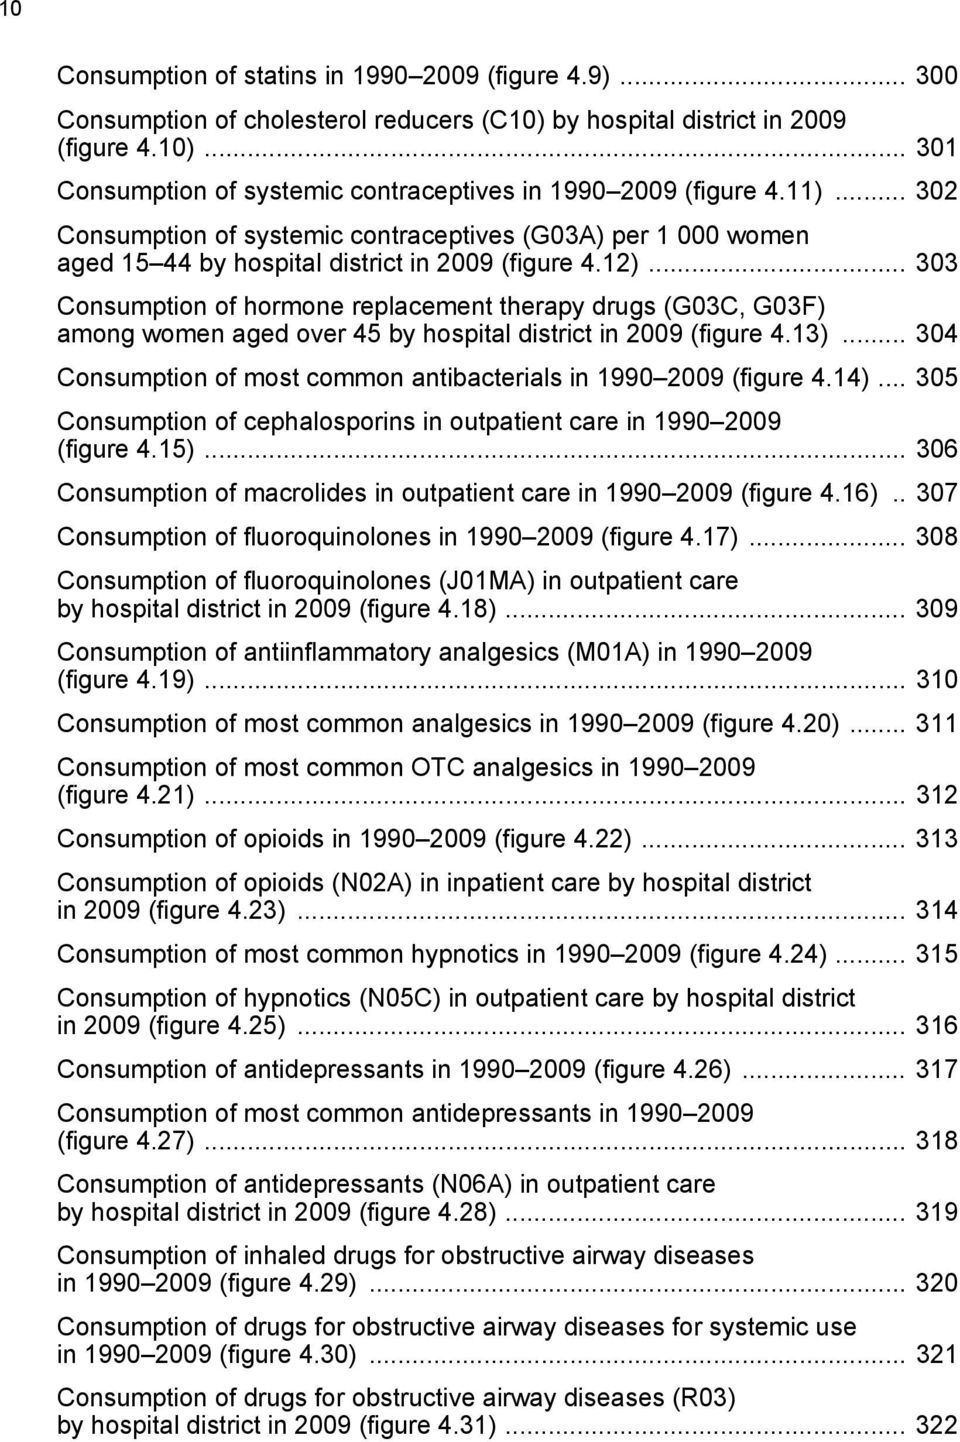 .. 303 Consumption of hormone replacement therapy drugs (G03C, G03F) among women aged over 45 by hospital district in 2009 (figure 4.13).